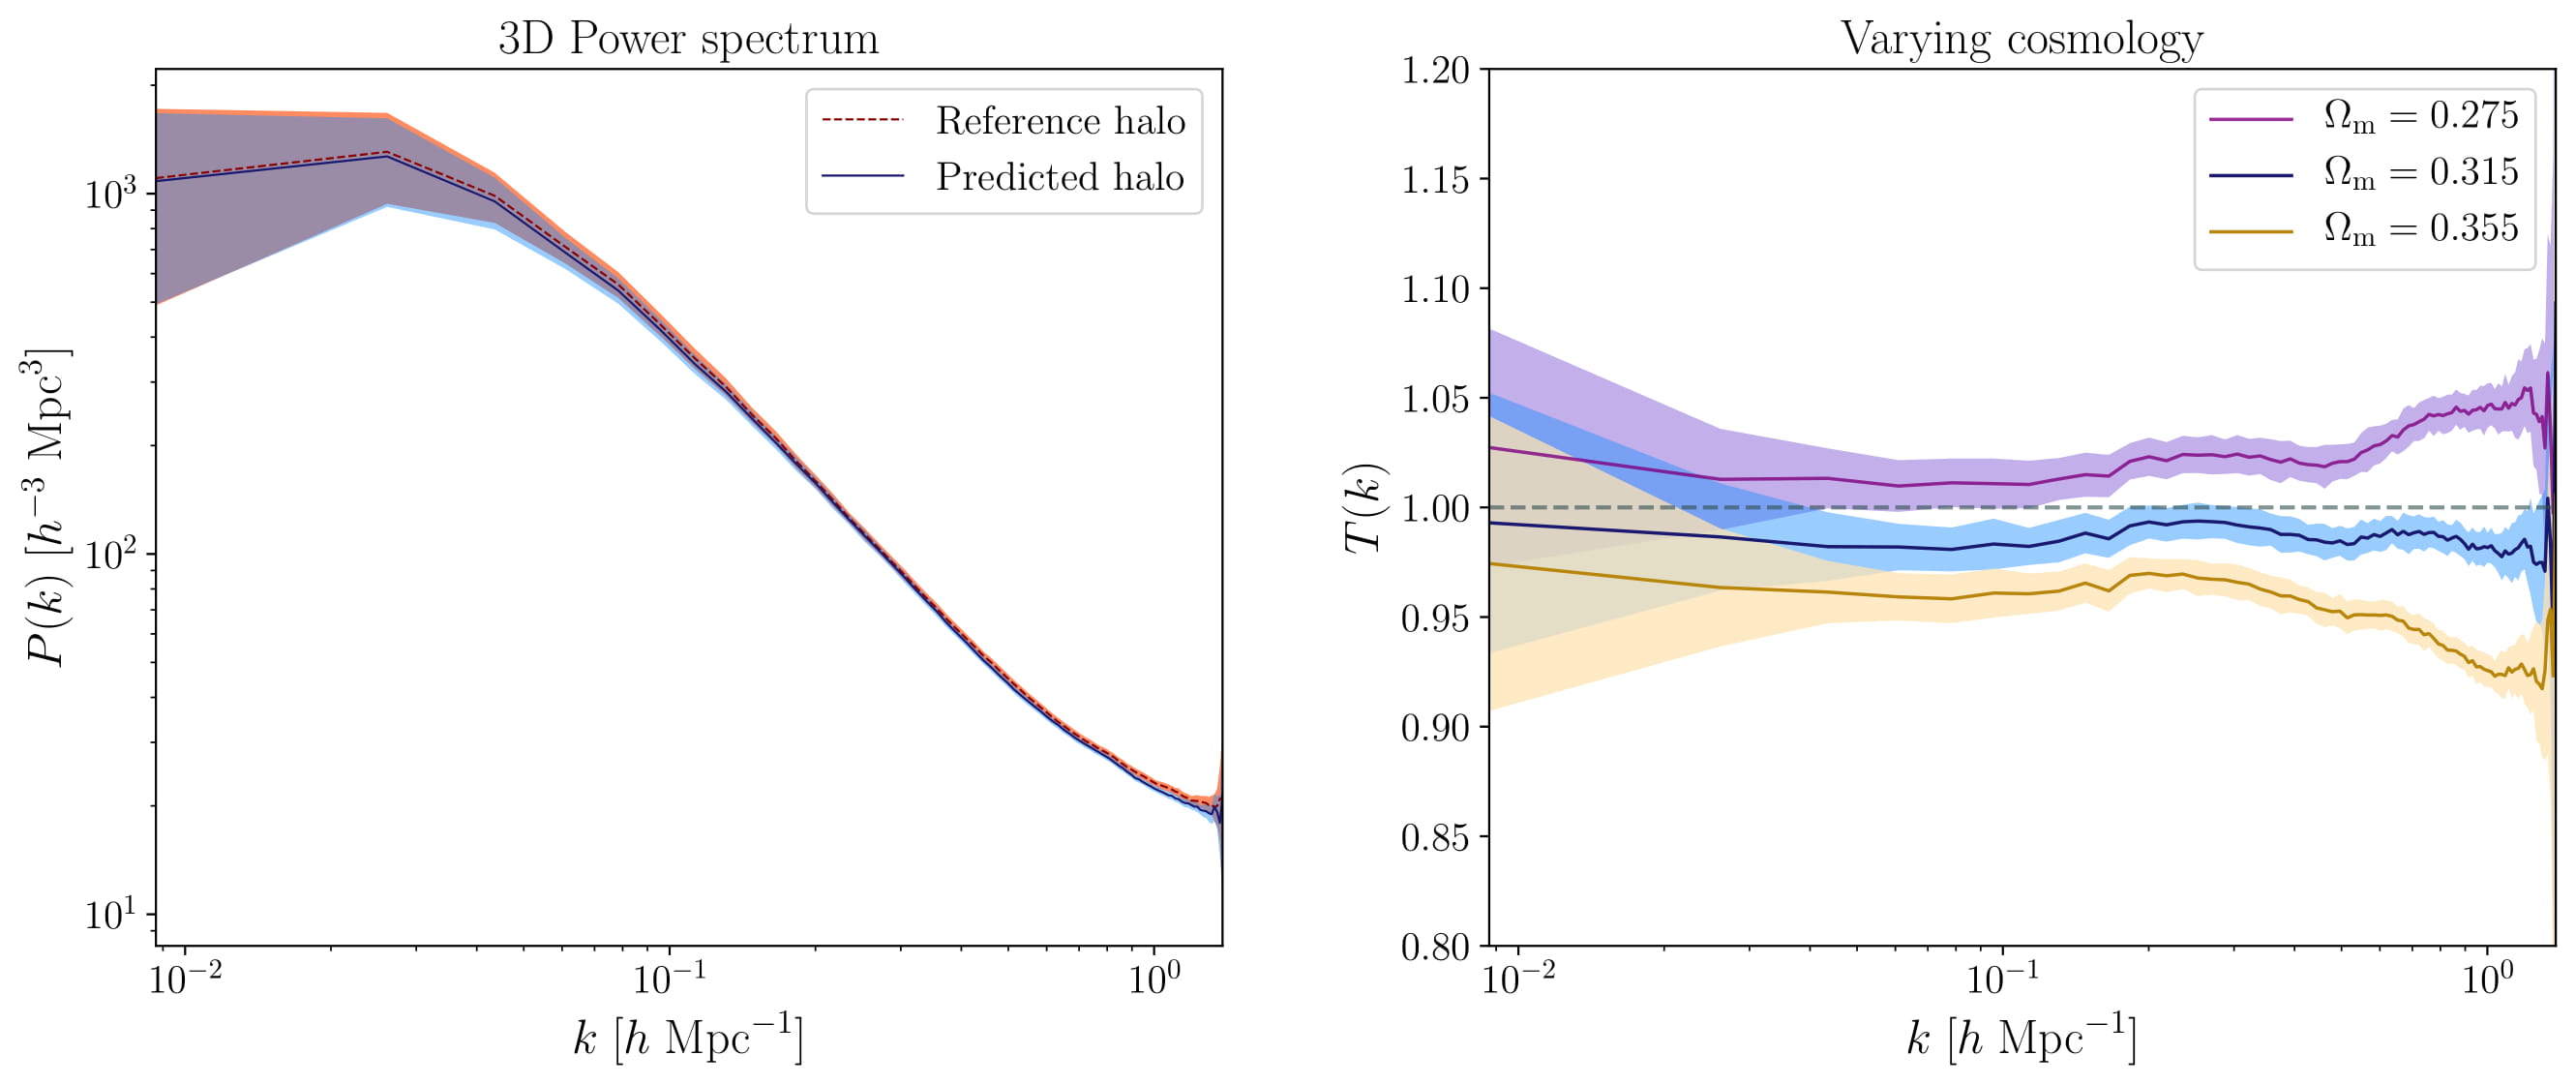 3D power spectra of reference and predicted halo fields